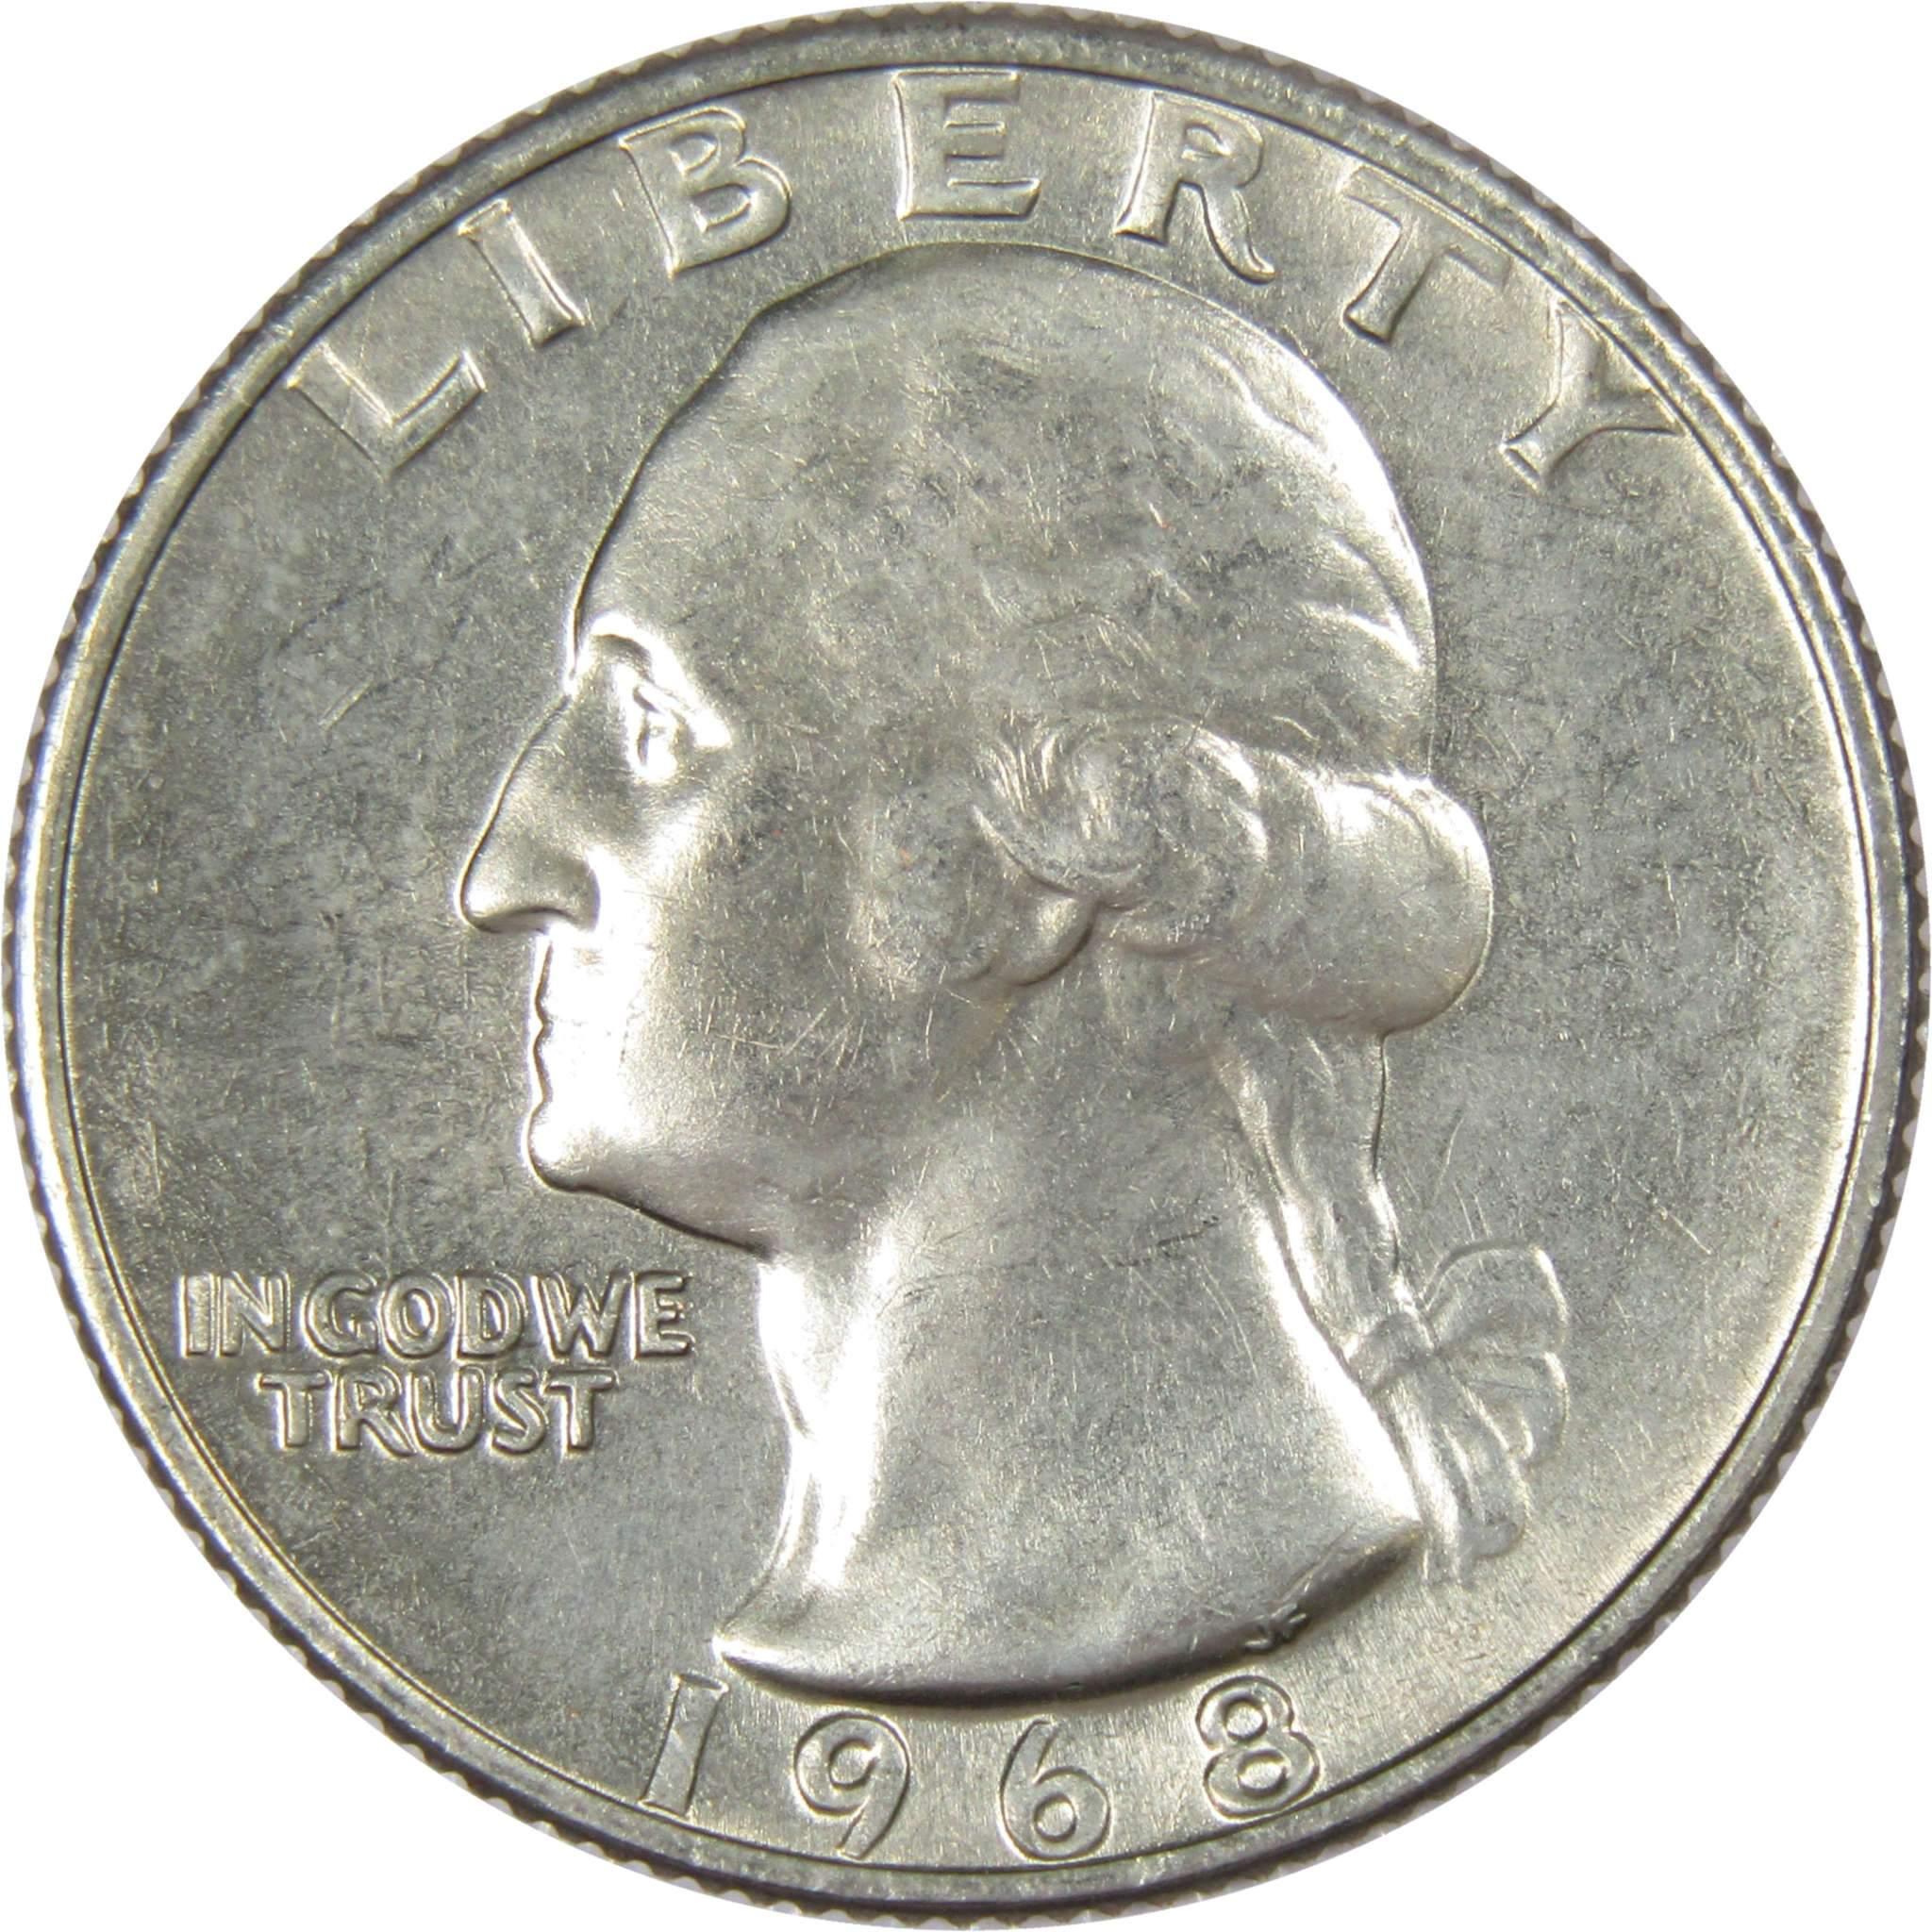 1968 Washington Quarter BU Uncirculated Mint State 25c US Coin Collectible